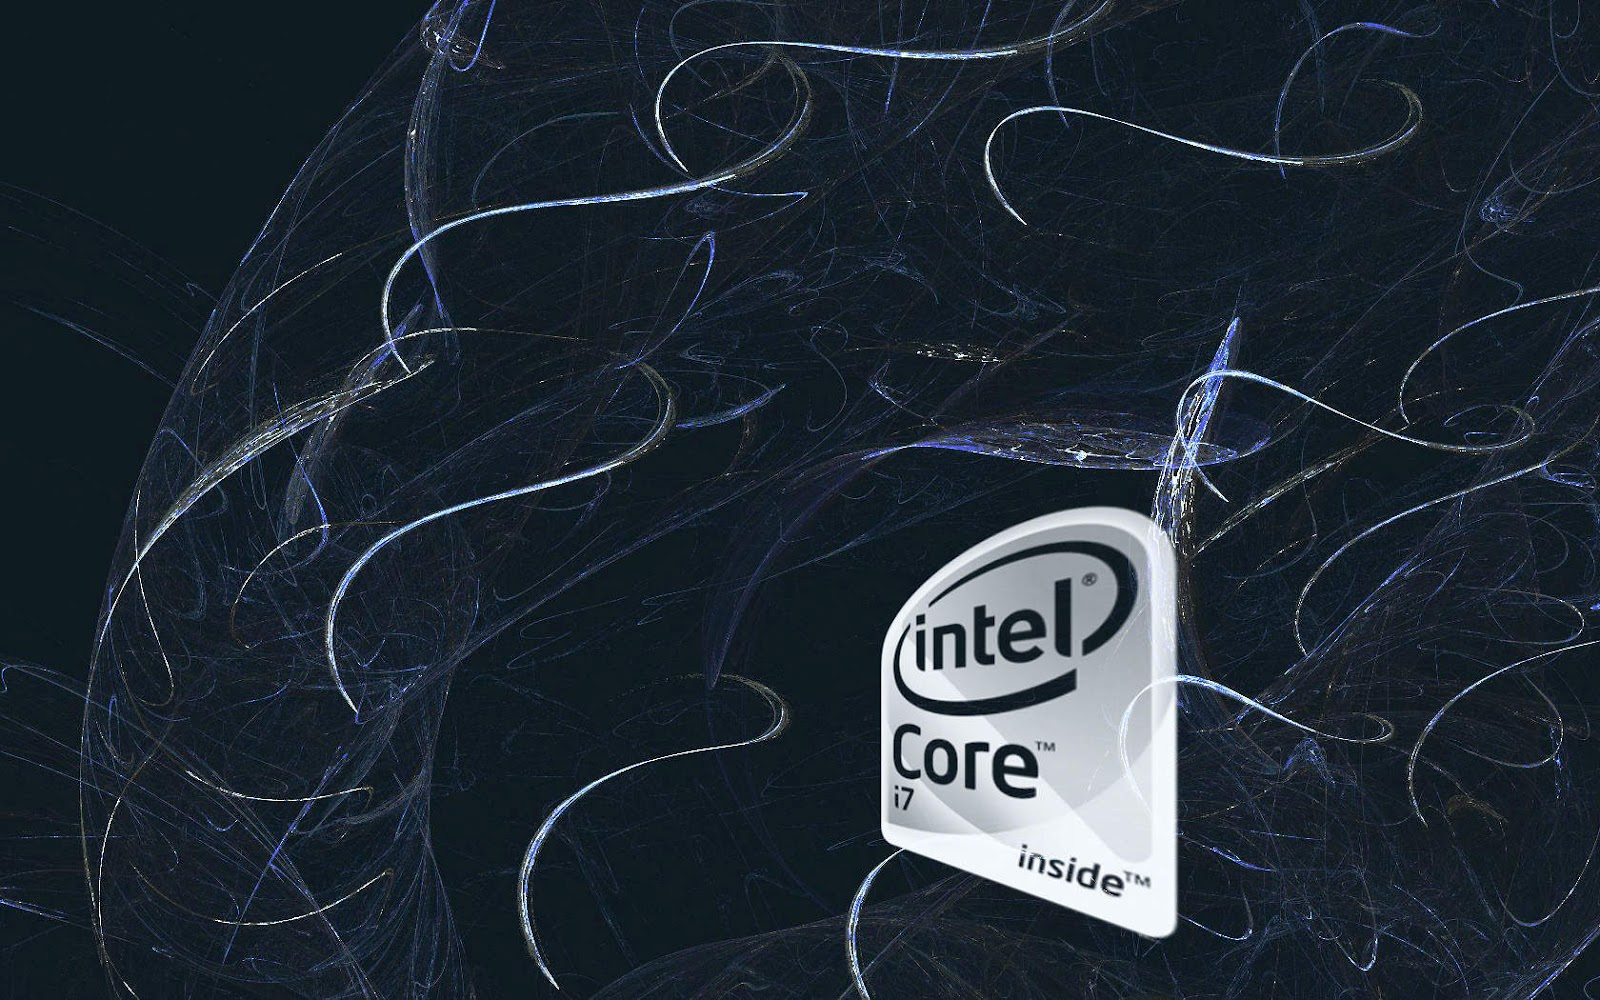 Intel Core I7 Wallpaper Collection For Your Puter And